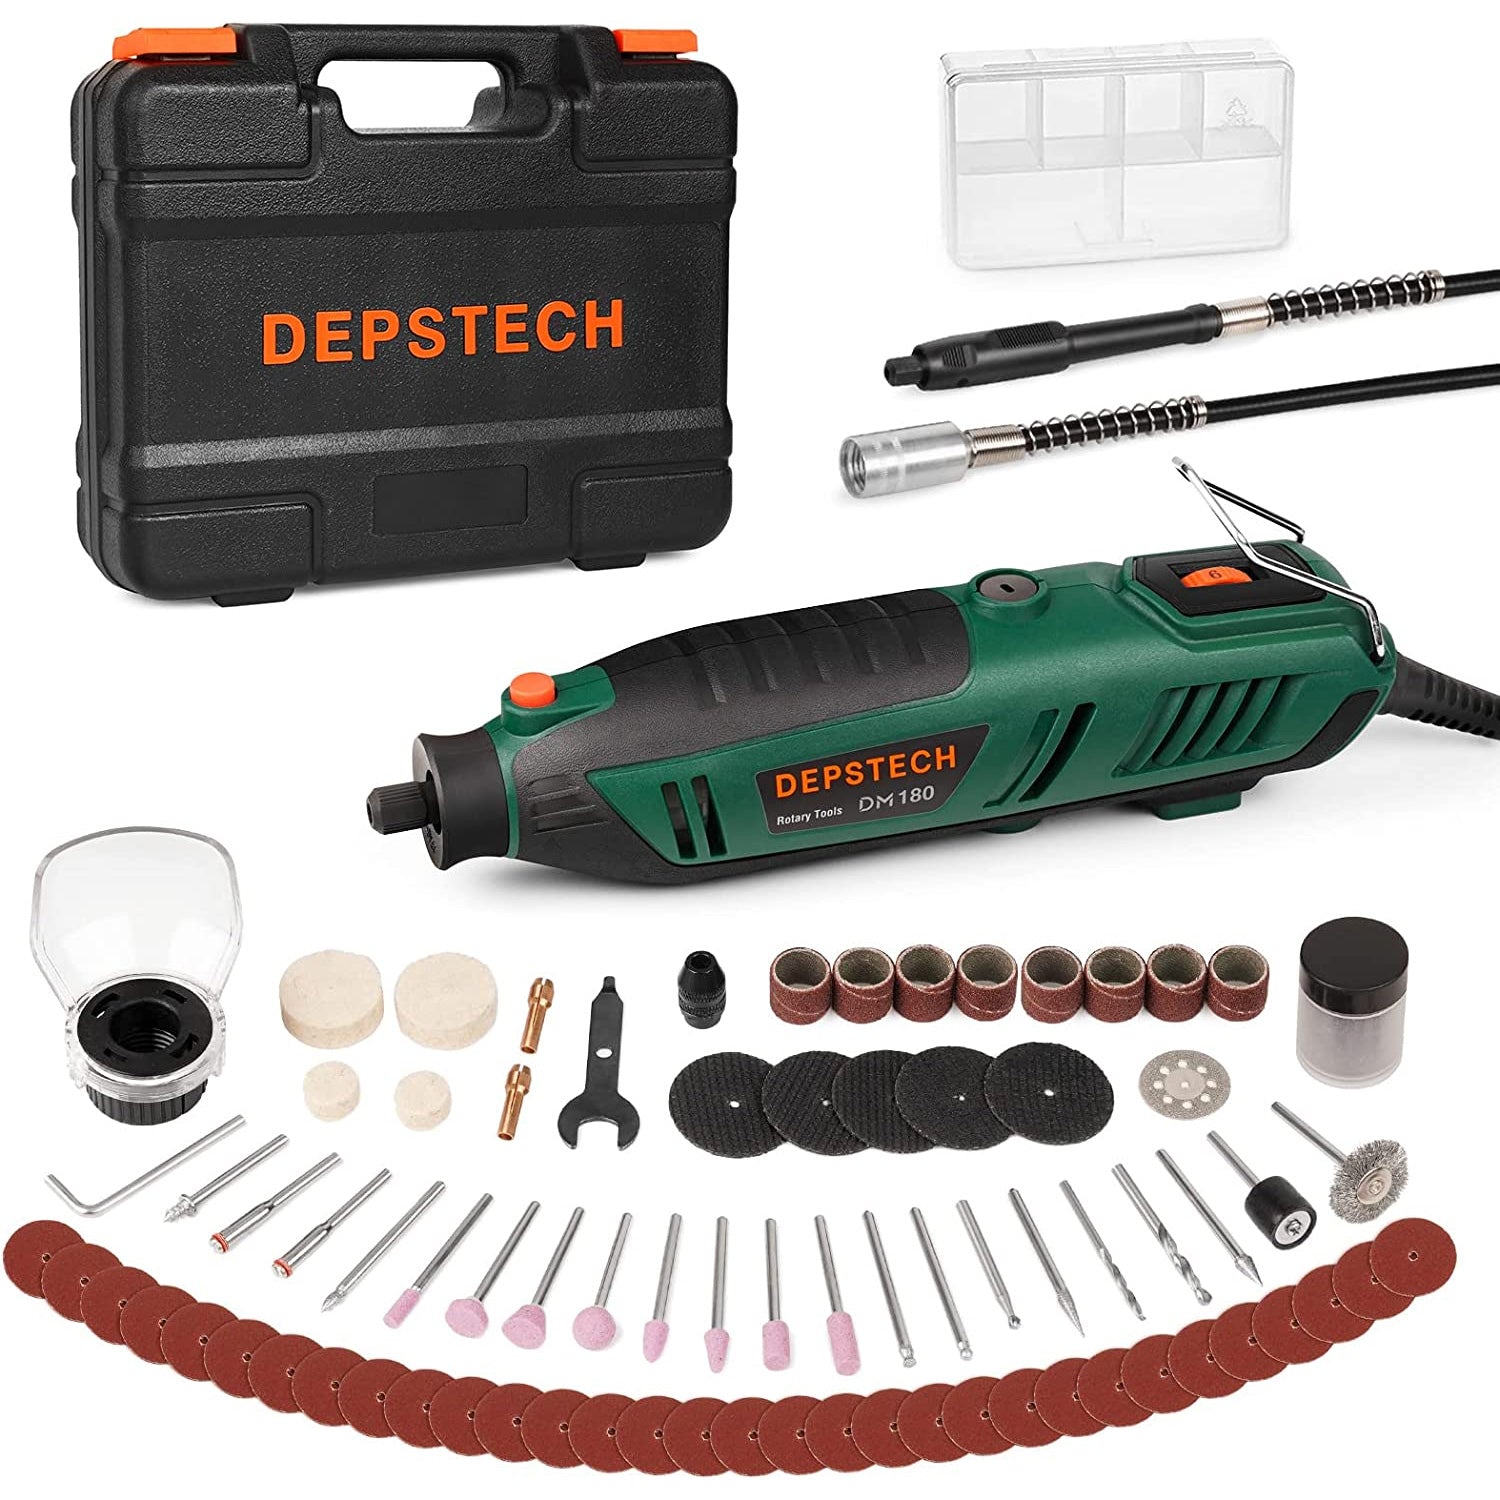 180W Corded Rotary Tool Kit, Wood Carving Tools with Keyless Chuck and Flex Shaft